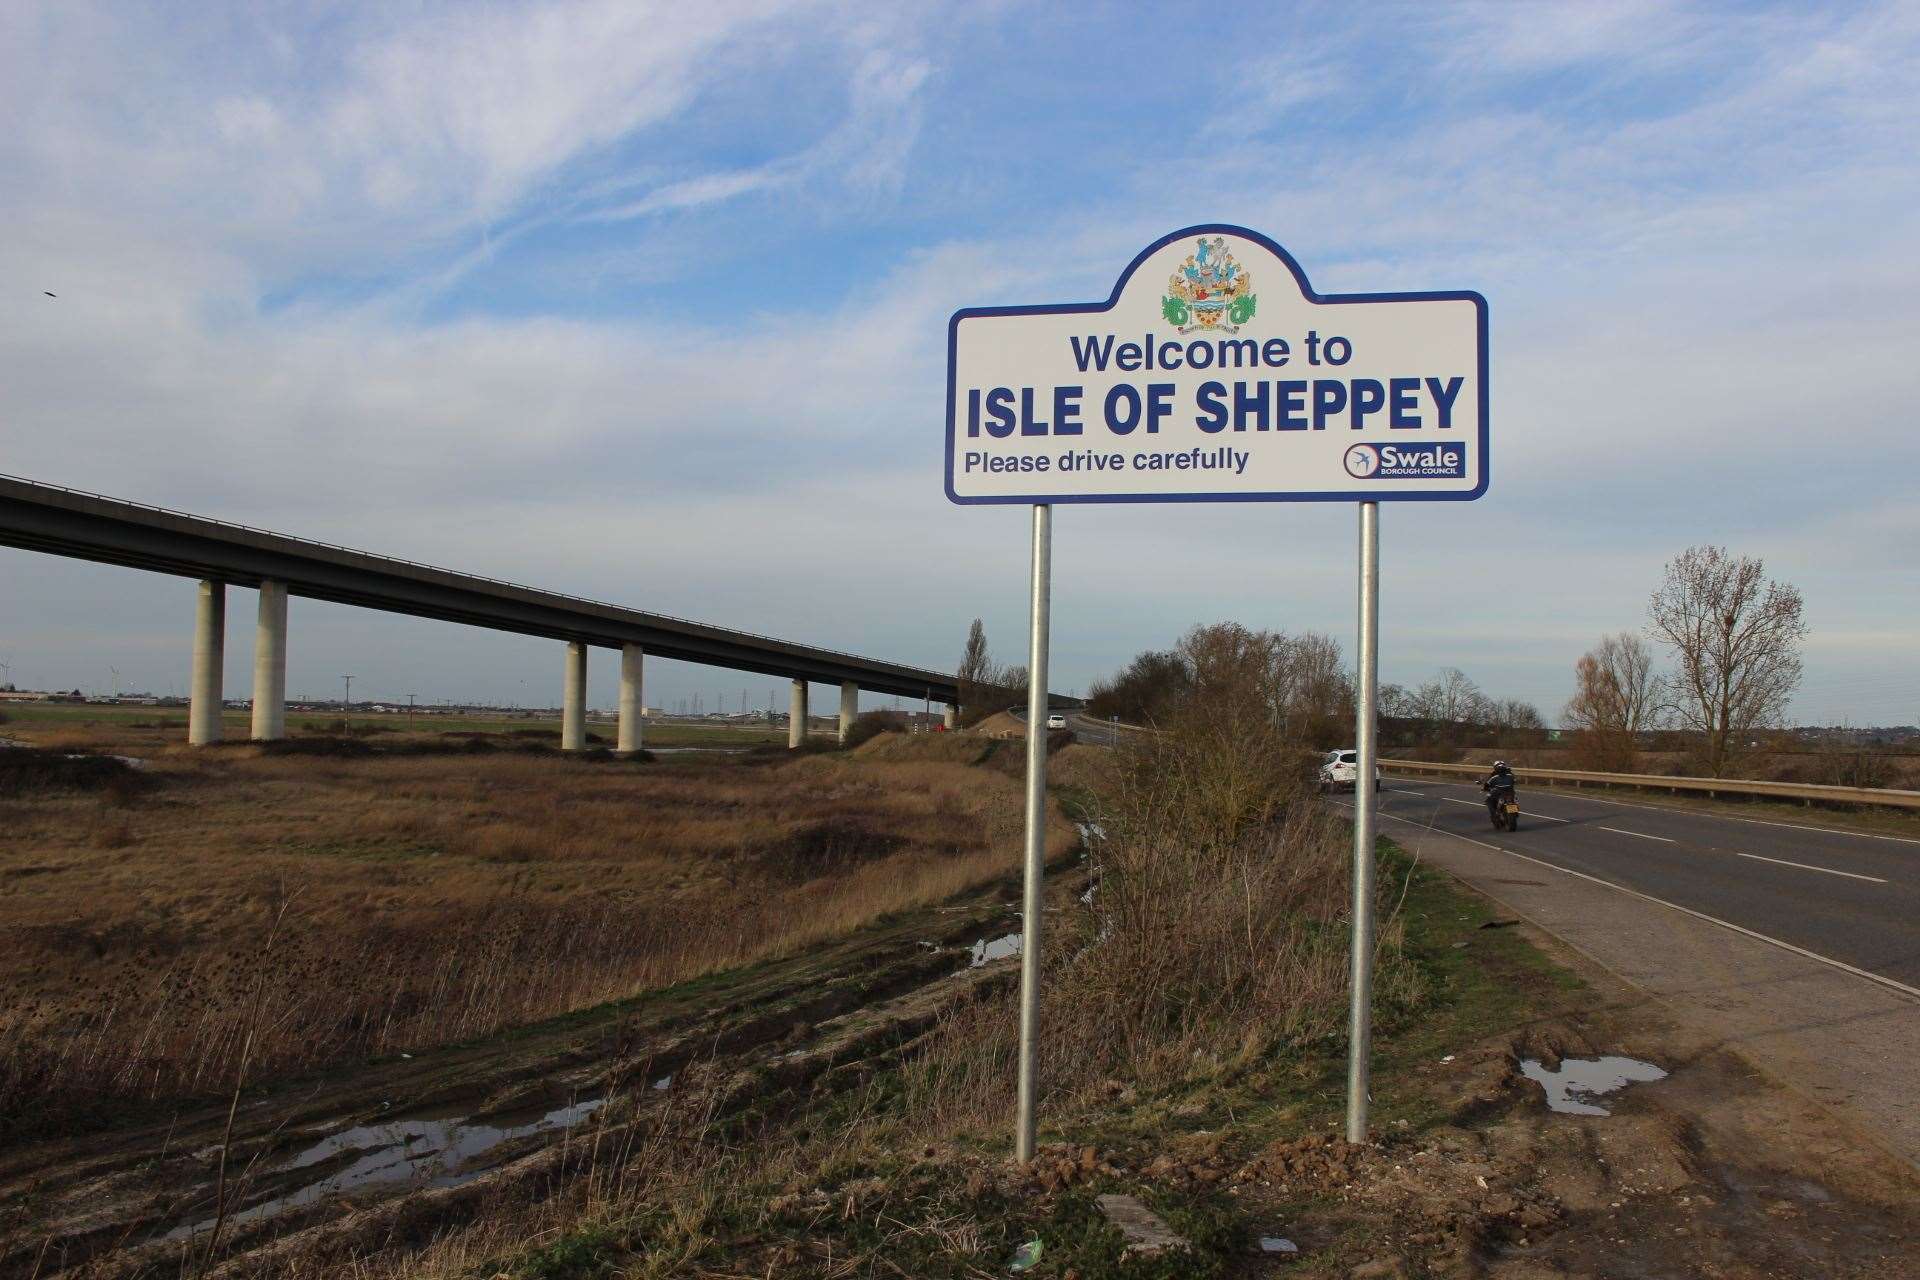 The bikers were stopped in the Queenborough area, not far from the Sheppey Crossing